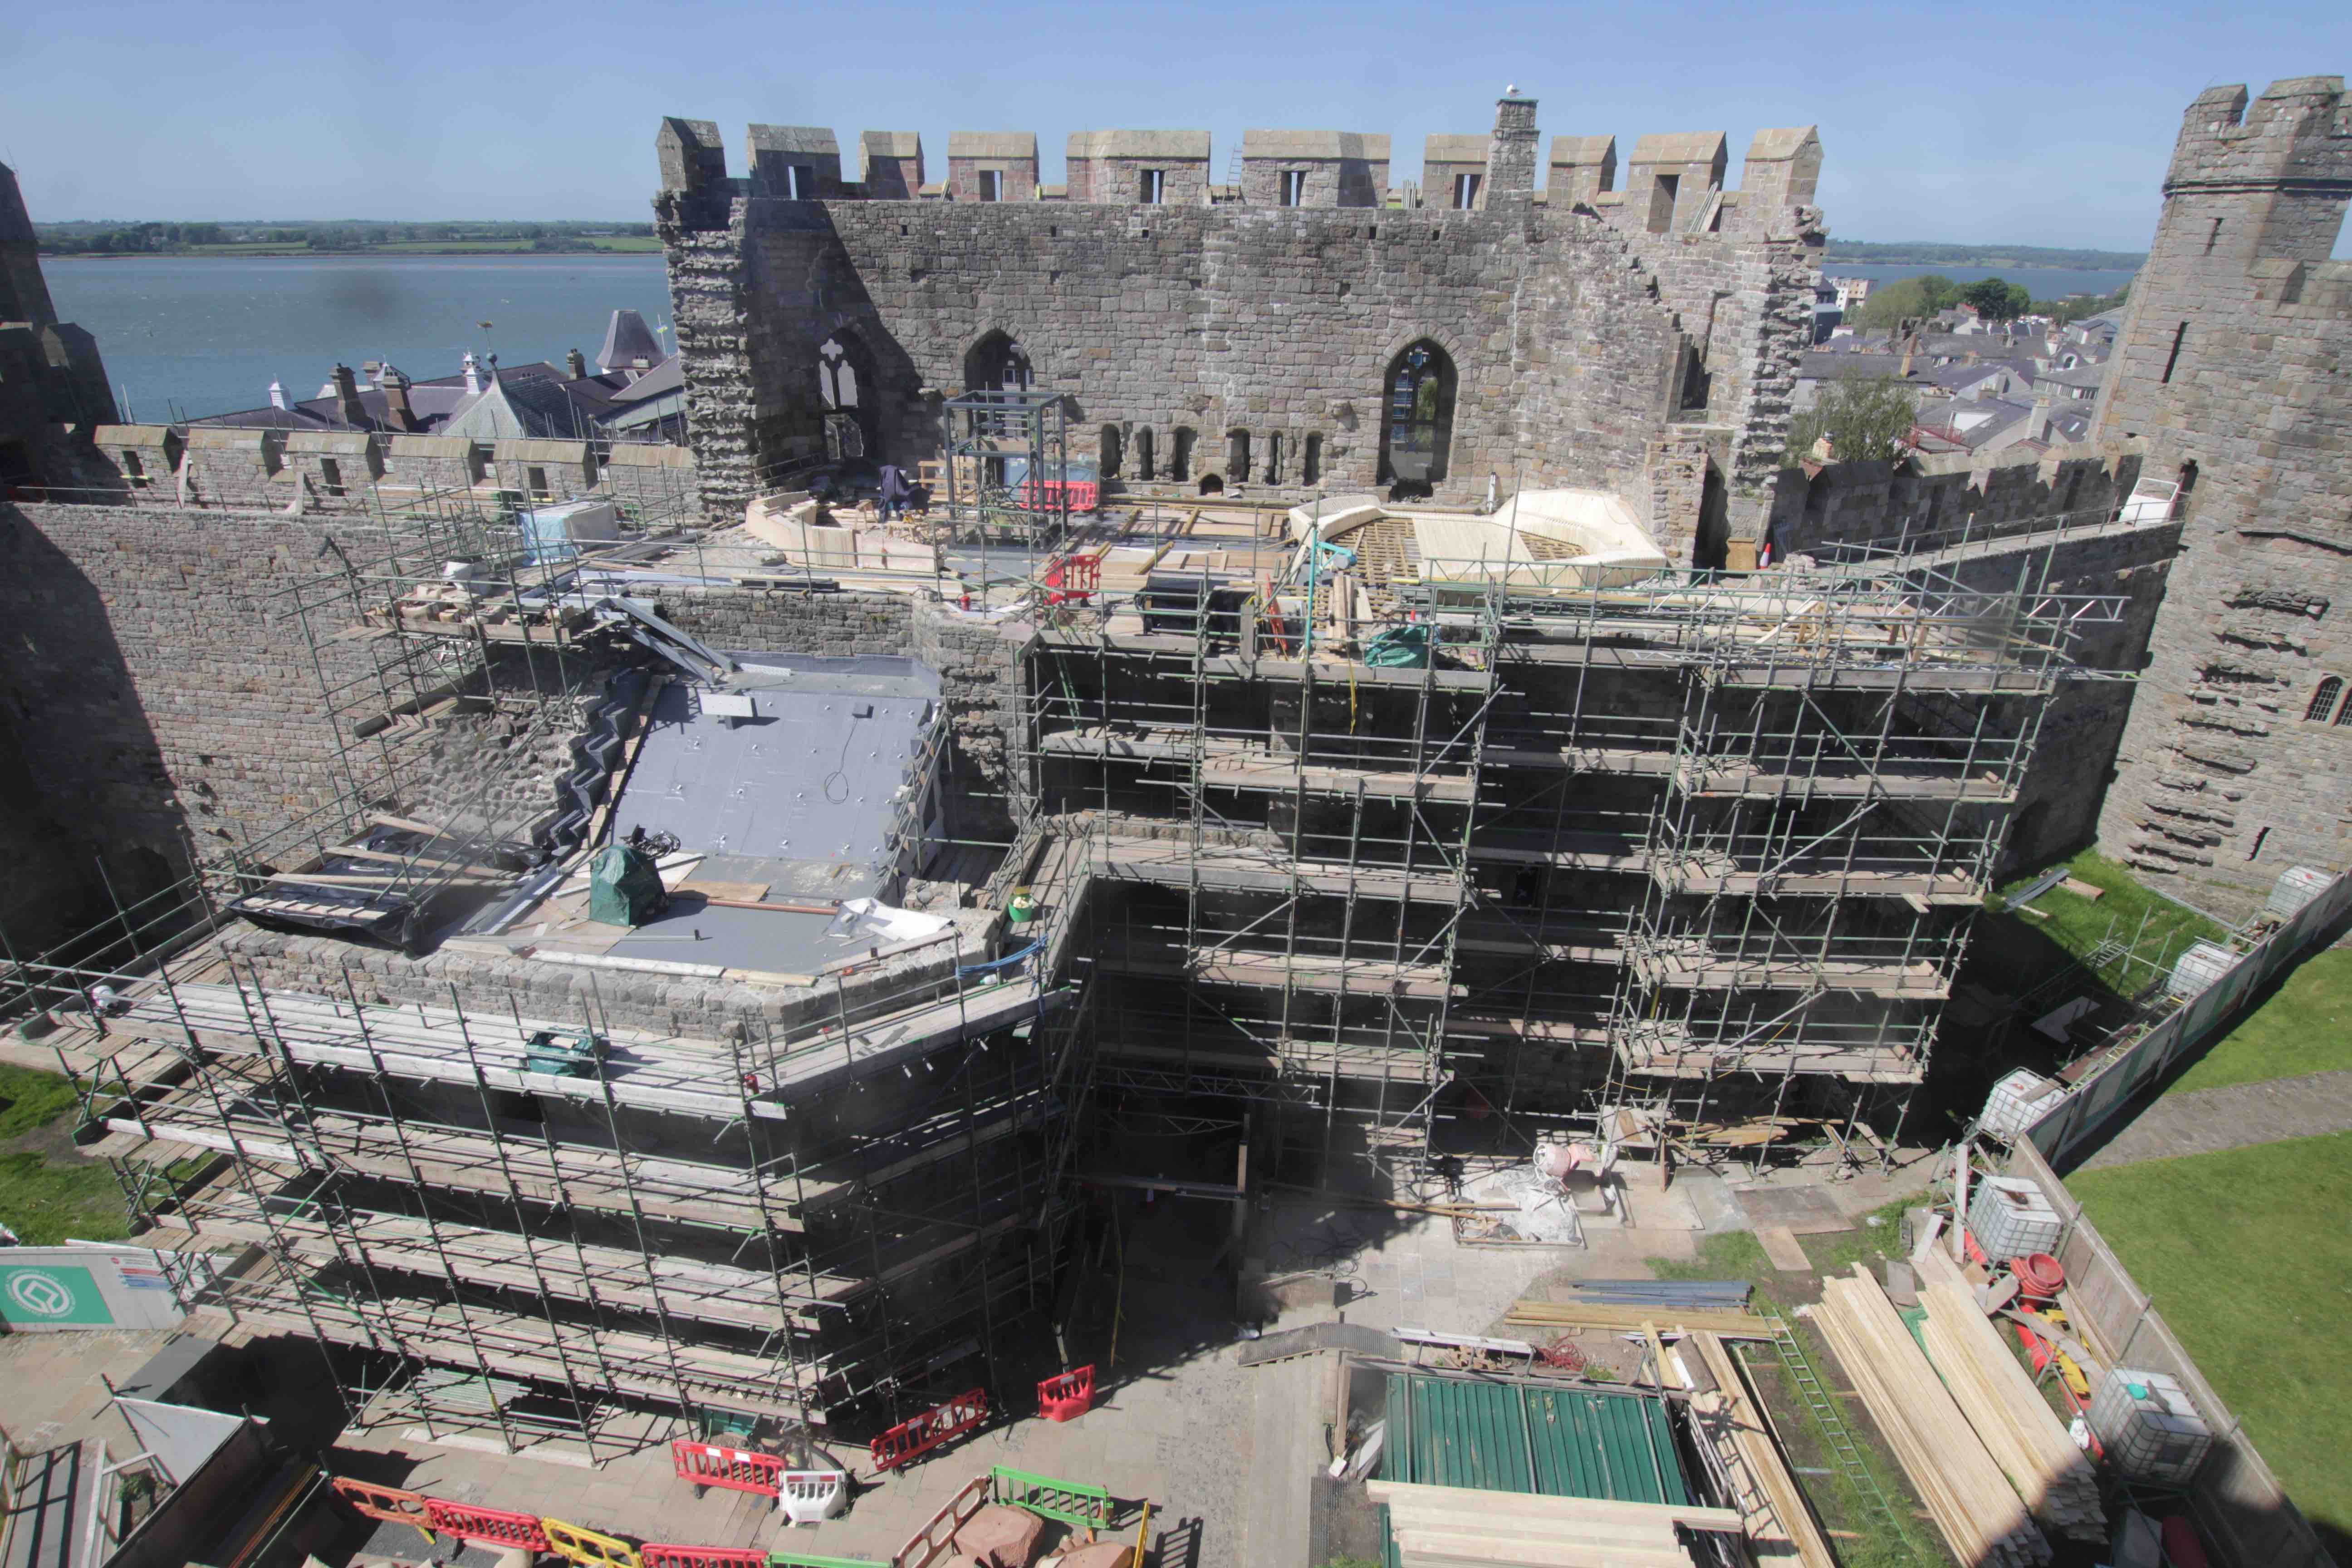 An image of Caernarfon Castle taken from one of Time-Lapse Systems' cameras.